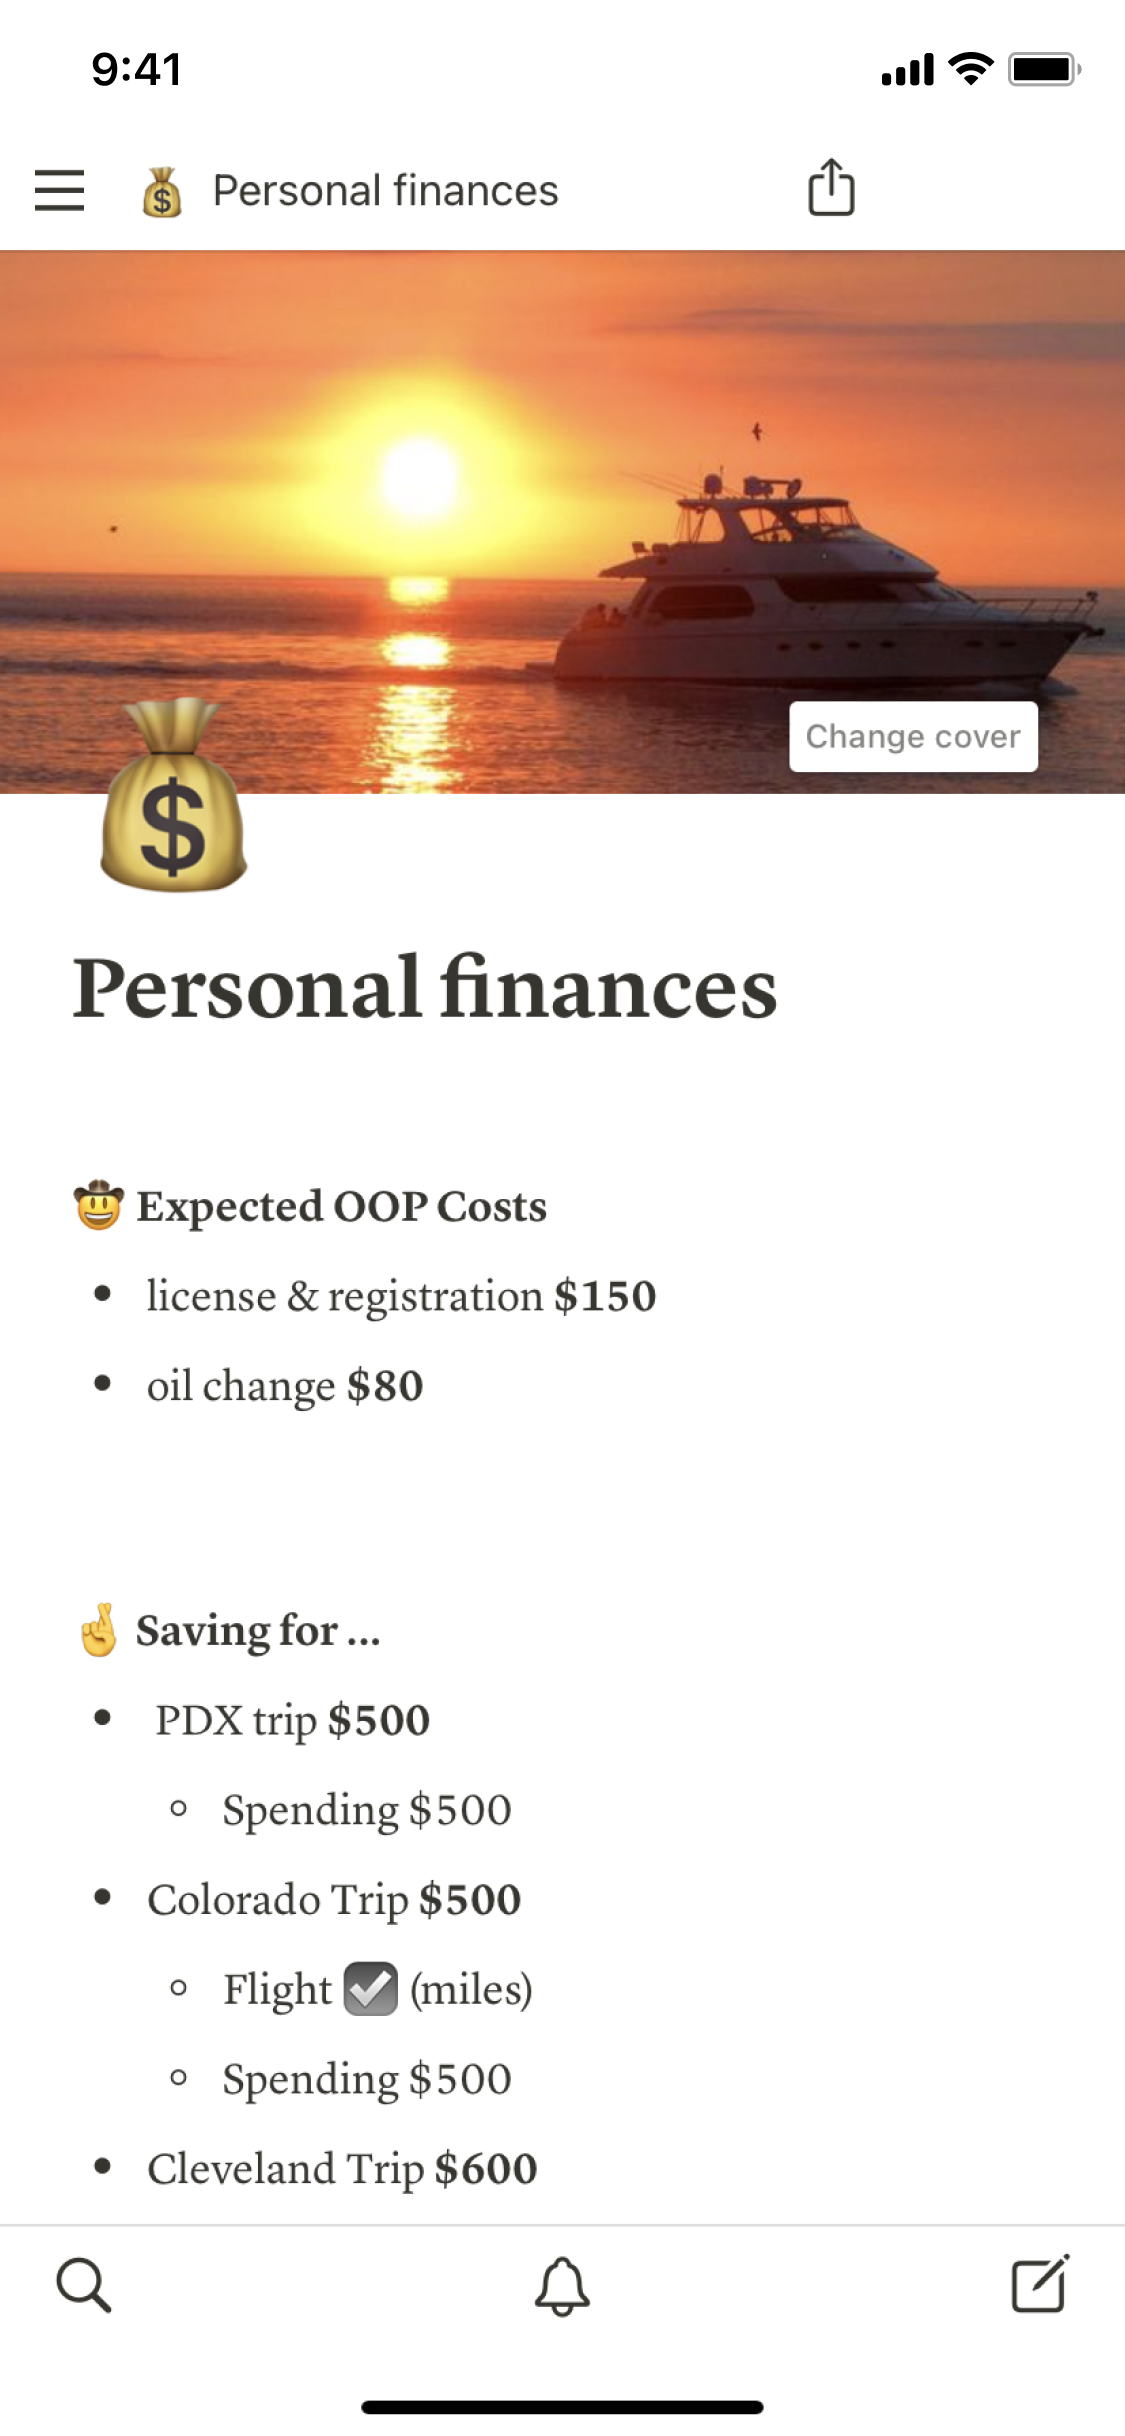 The mobile image for the Personal finances template